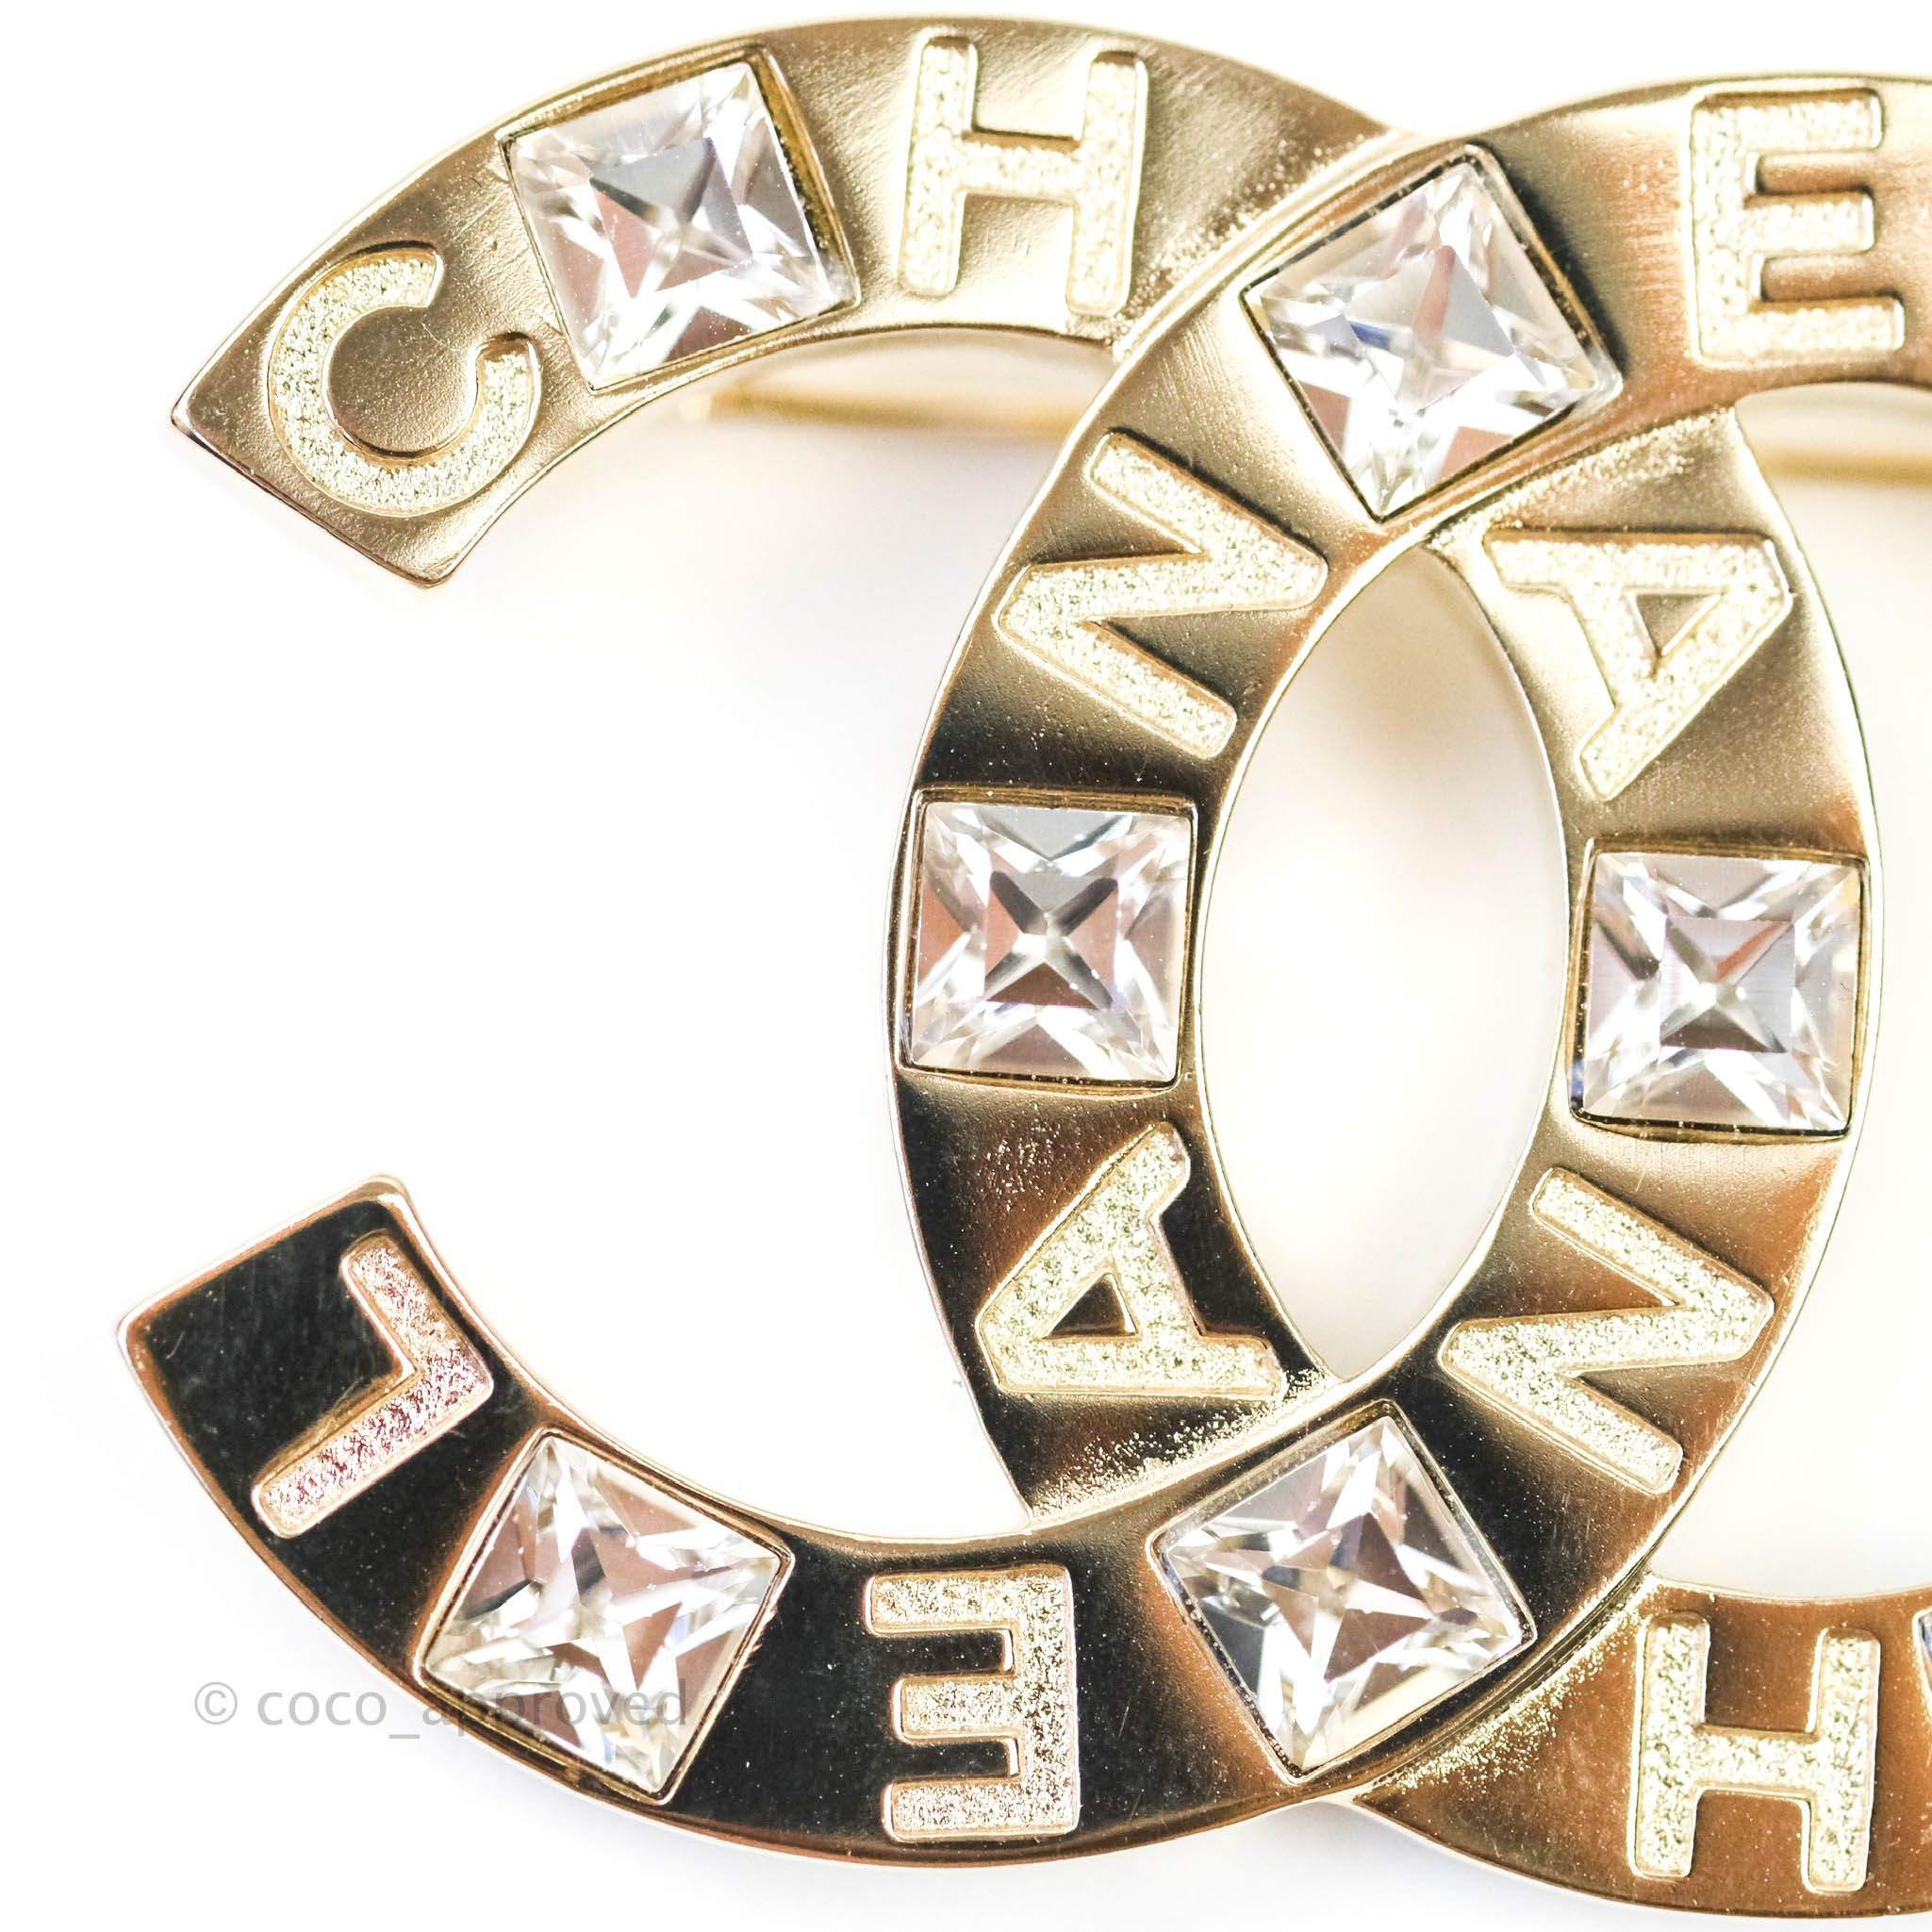 Chanel Cross Crystal Resin CC Brooch Gold Tone 23P – Coco Approved Studio